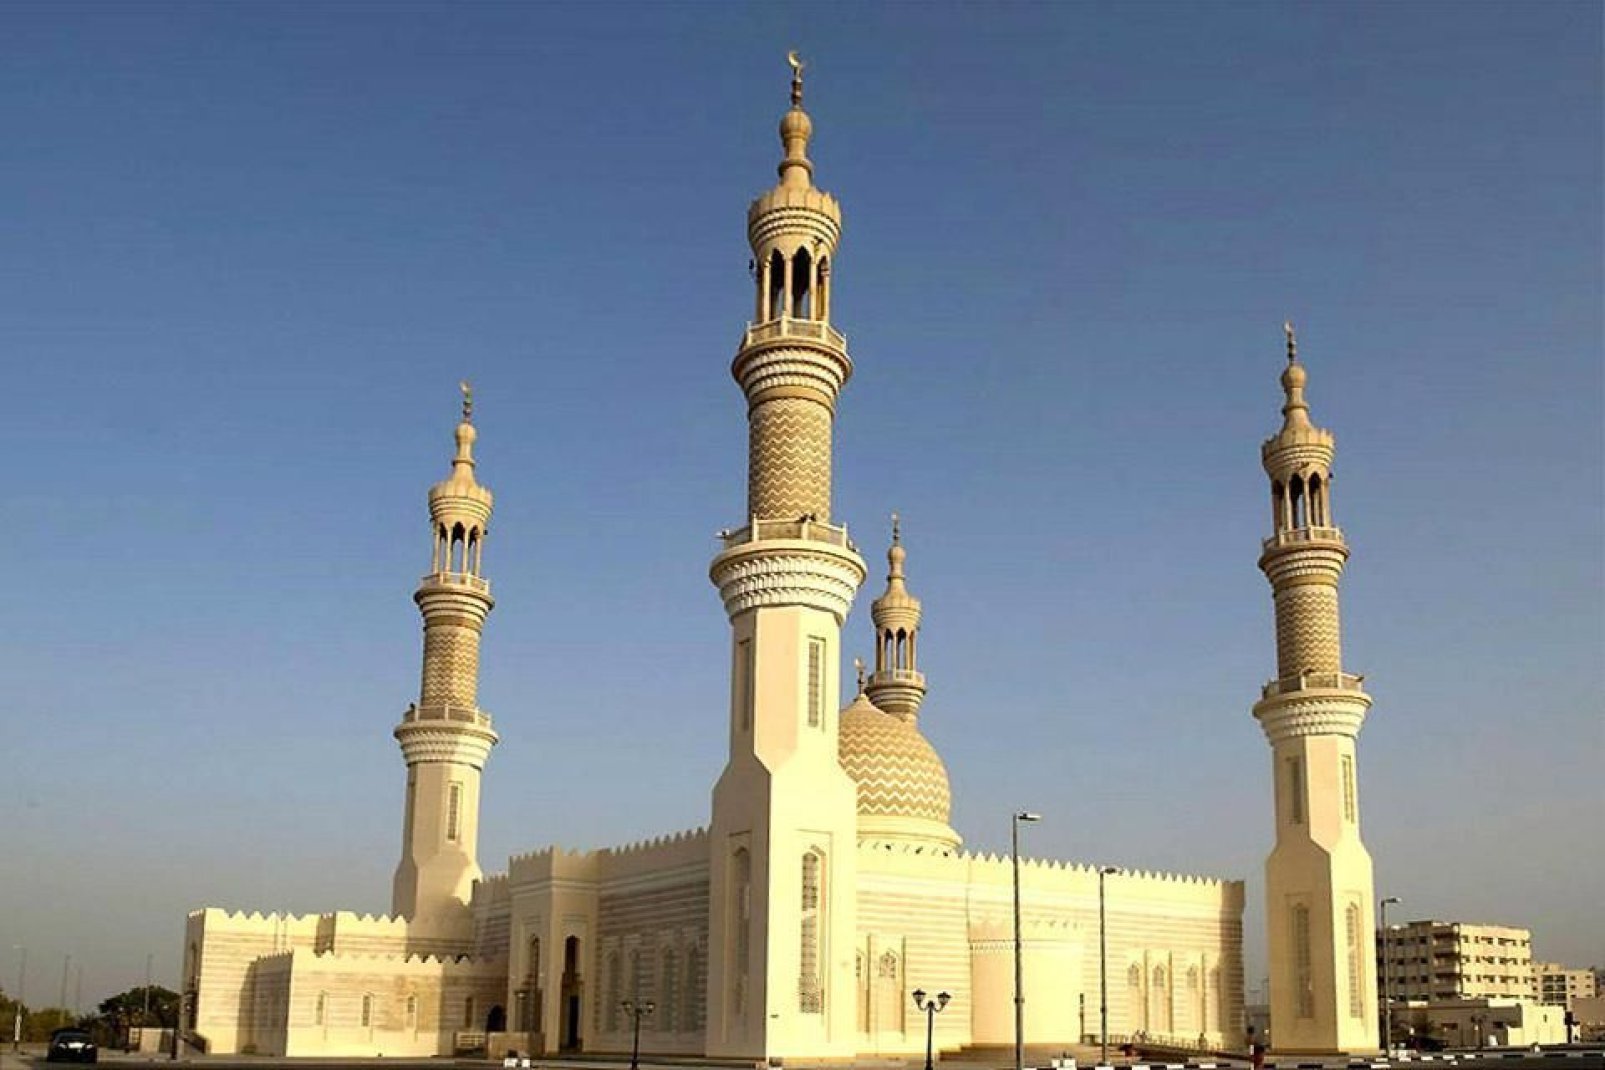 The mosque's minarets are typical of the traditional architecture of the emirates.